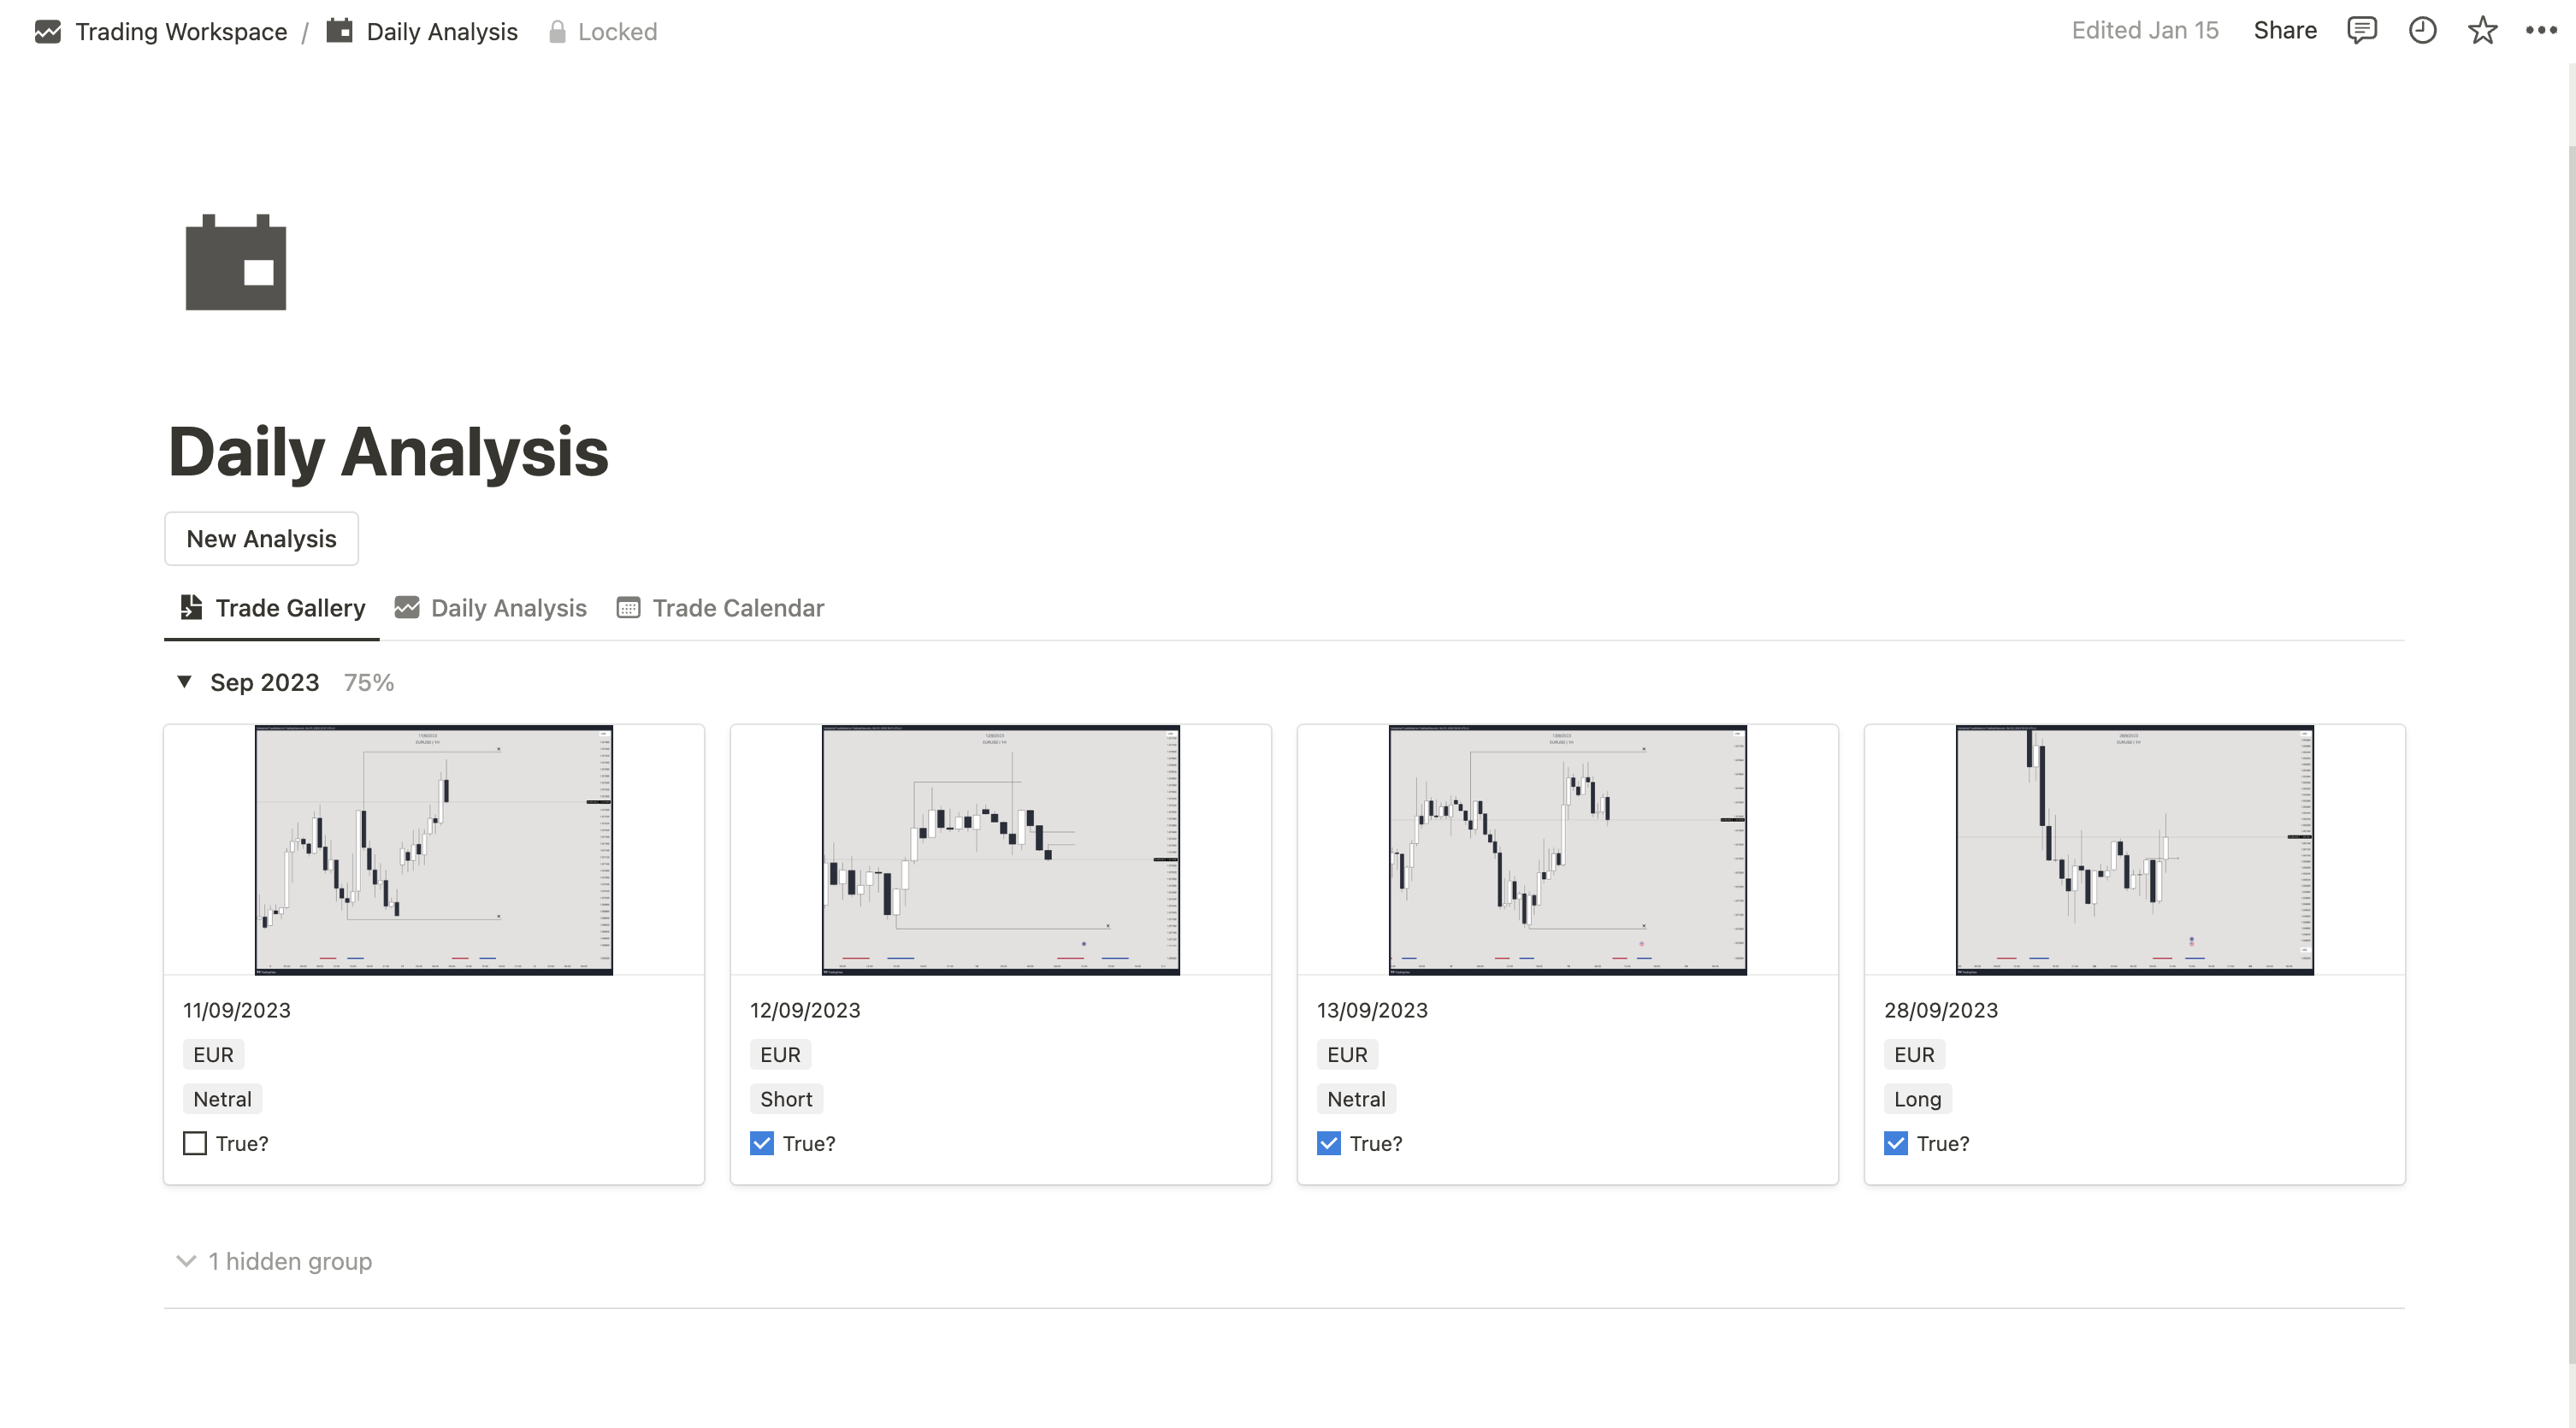 This workspace will help you organize all your trading, view your statistics and trade notes.